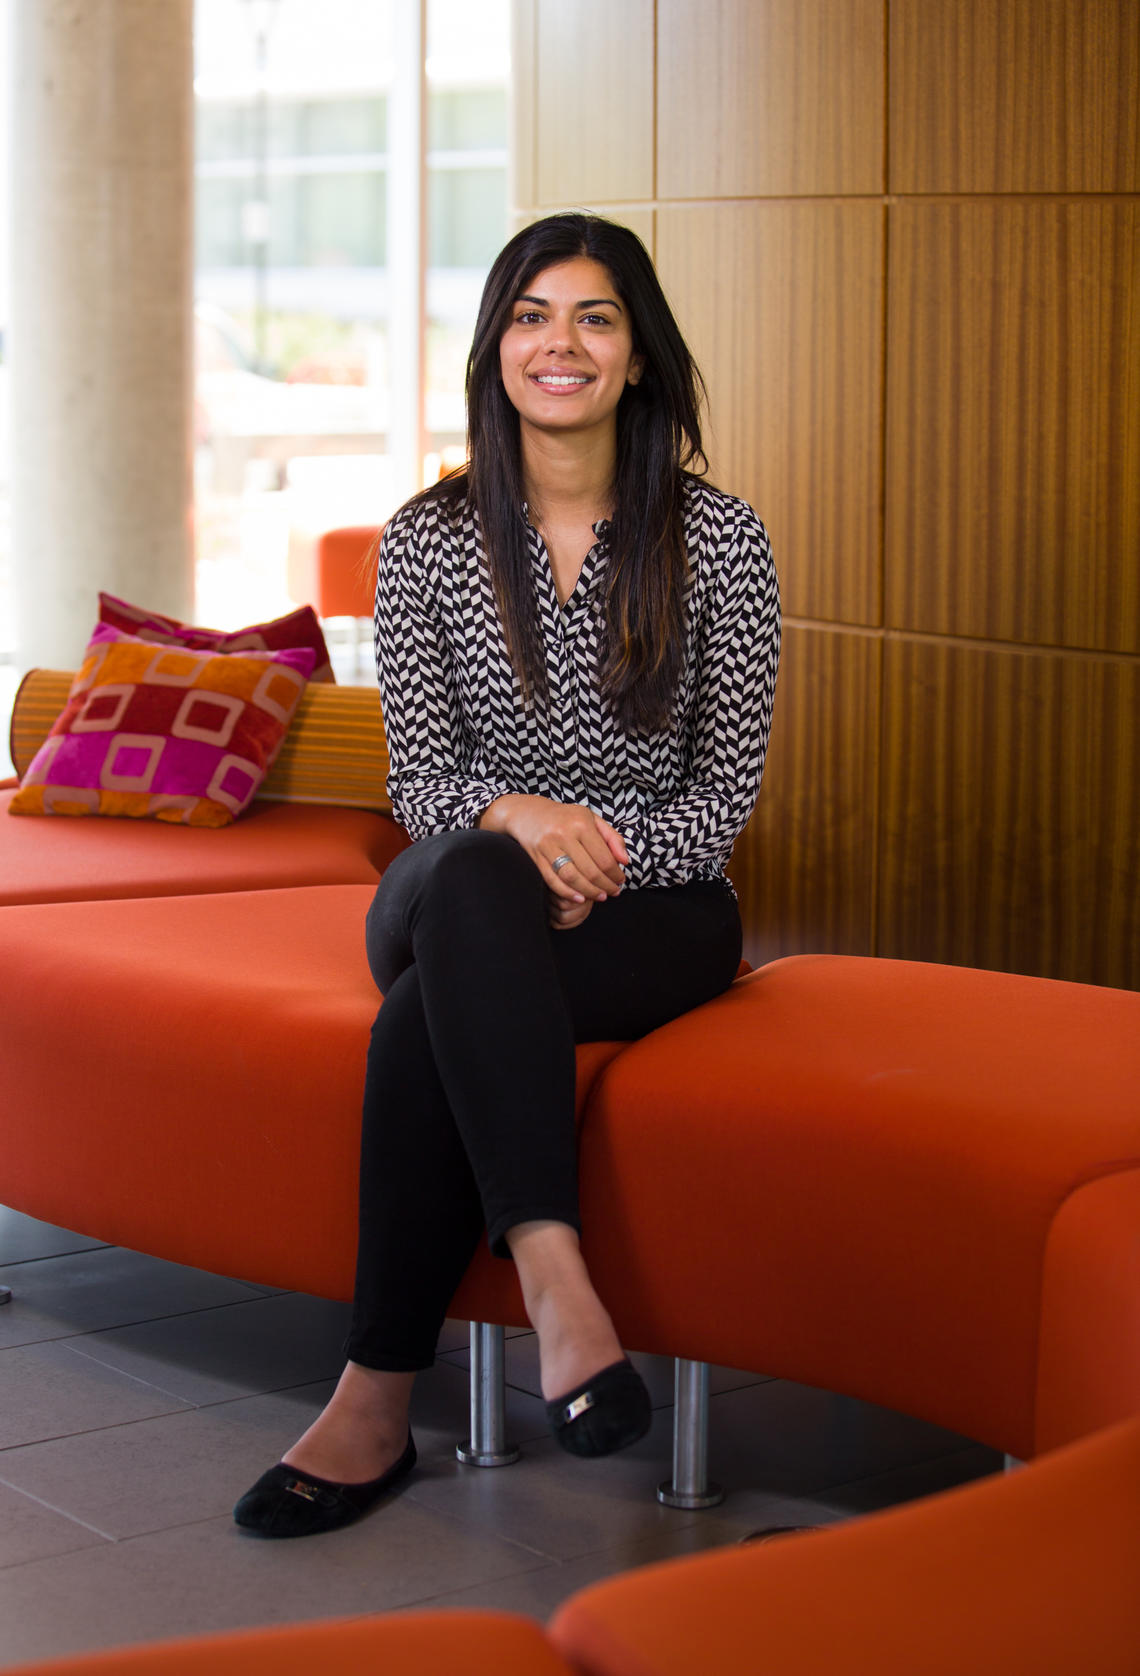 Hena Qureshi, a master's student at the Cumming School of Medicine, says three factors made a difference to their team in the competition: a great multidisciplinary team, accomplished mentors, and expertise from the outside to lean on.